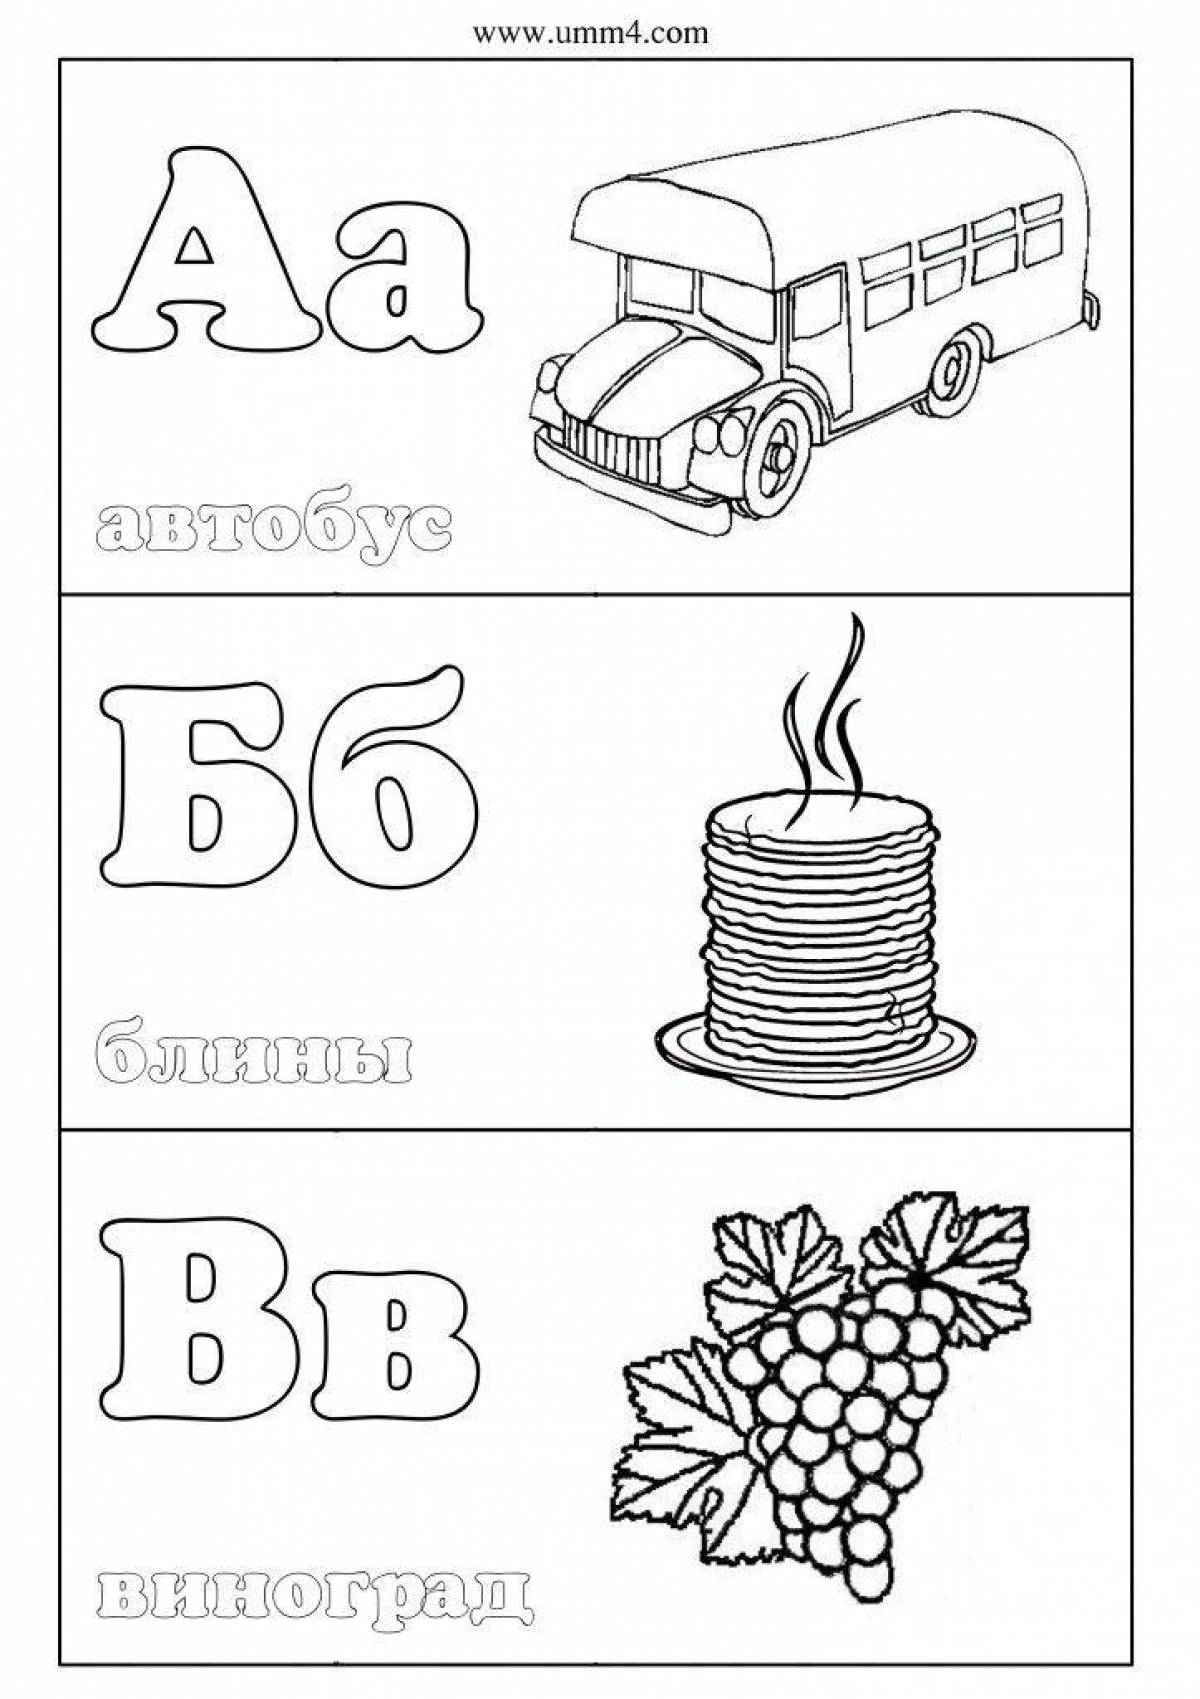 Exciting alphabet coloring book for the little ones